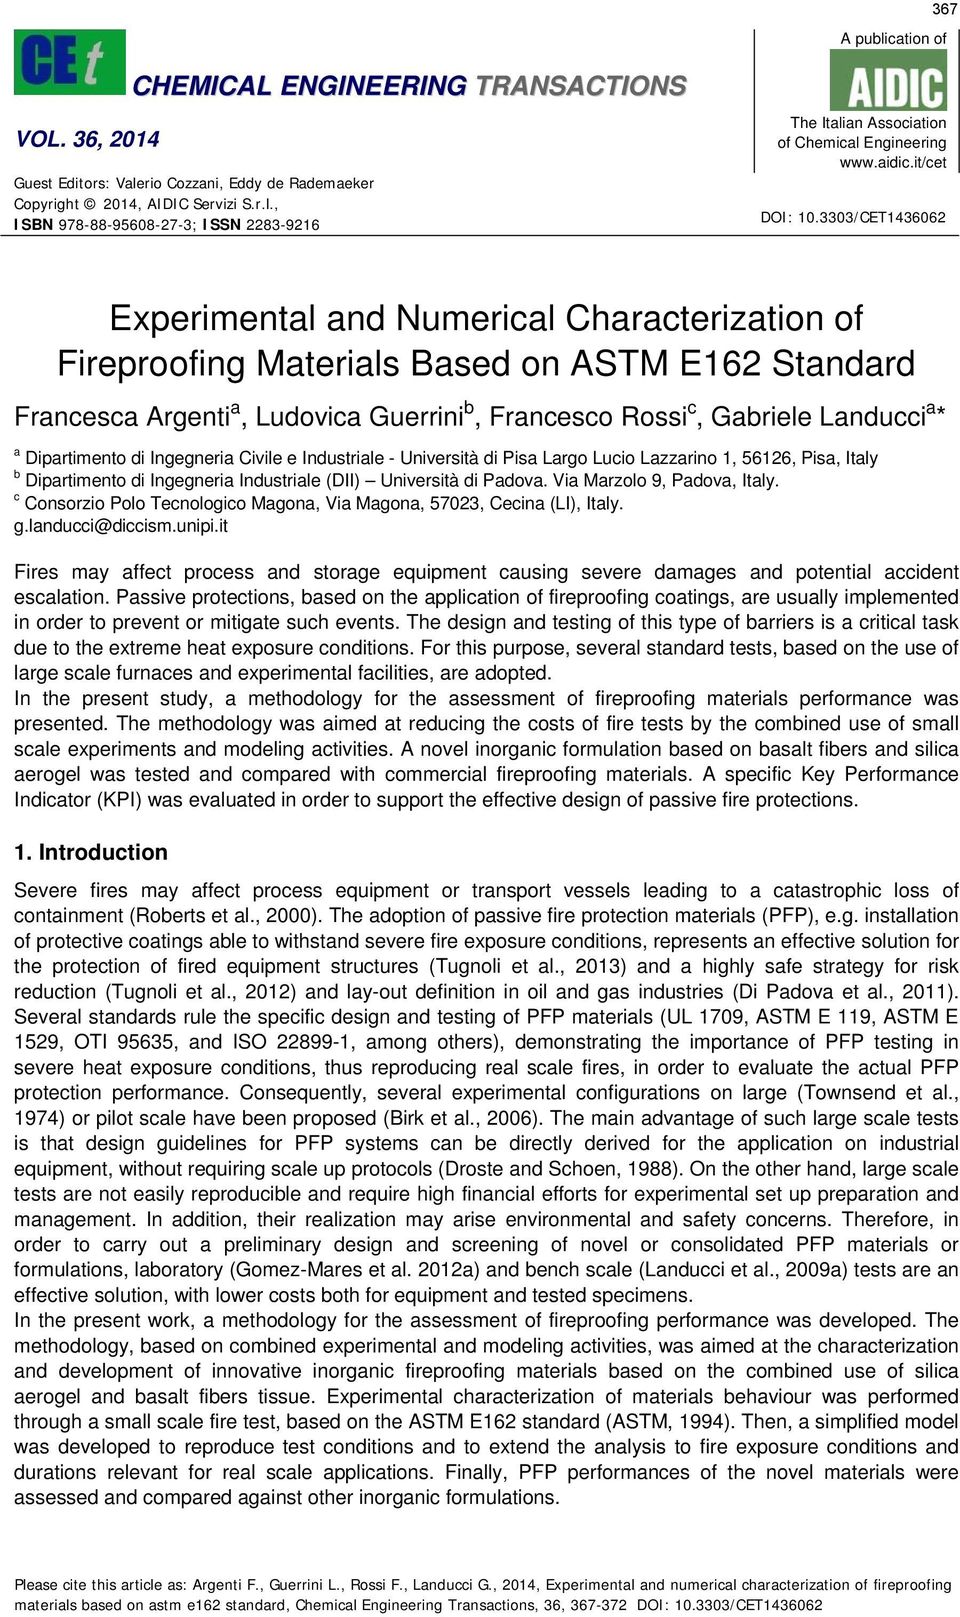 333/CET14366 Experimental and Numerical Characterization of Fireproofing Materials Based on ASTM E16 Standard Francesca Argenti a, Ludovica Guerrini b, Francesco Rossi c, Gabriele Landucci a * a